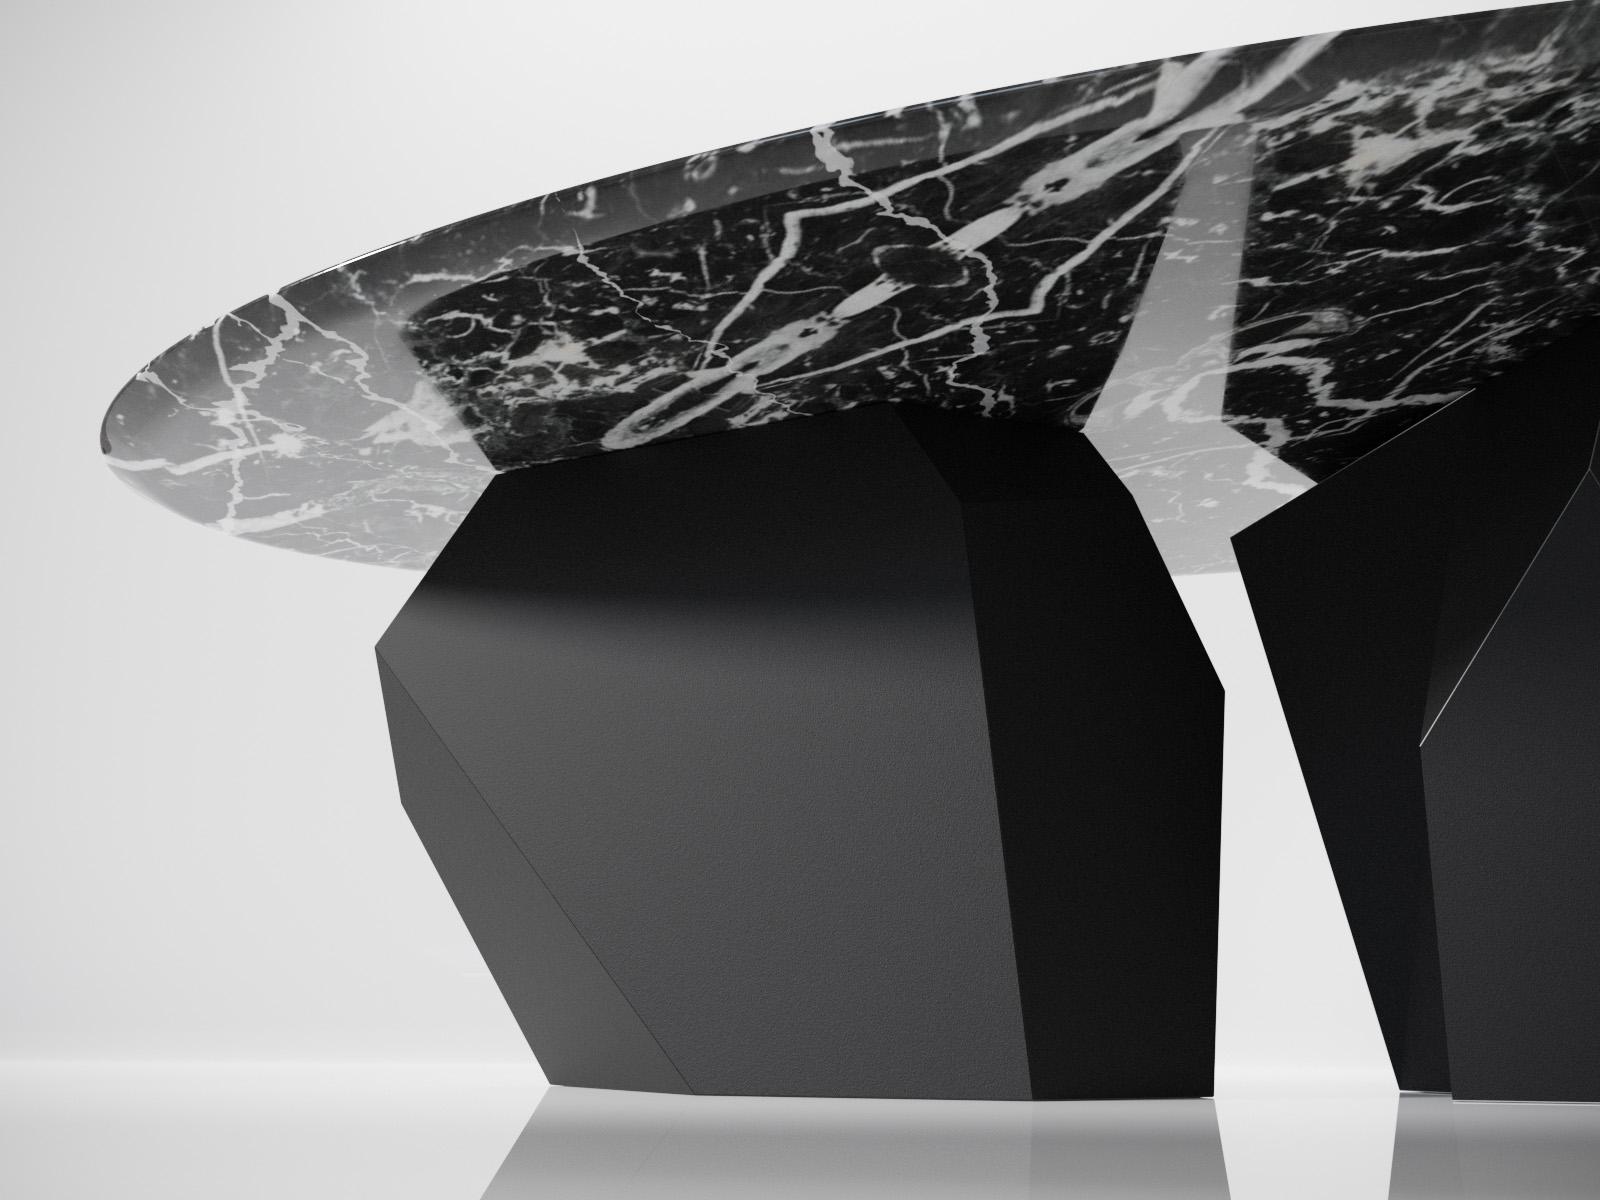 Kronos is the latest modern furniture design from Duffy London. A unique coffee table design within the Solo collection of sculptural works from British designer Chris Duffy. Materials of marble and metal combine to form a modern statement piece in